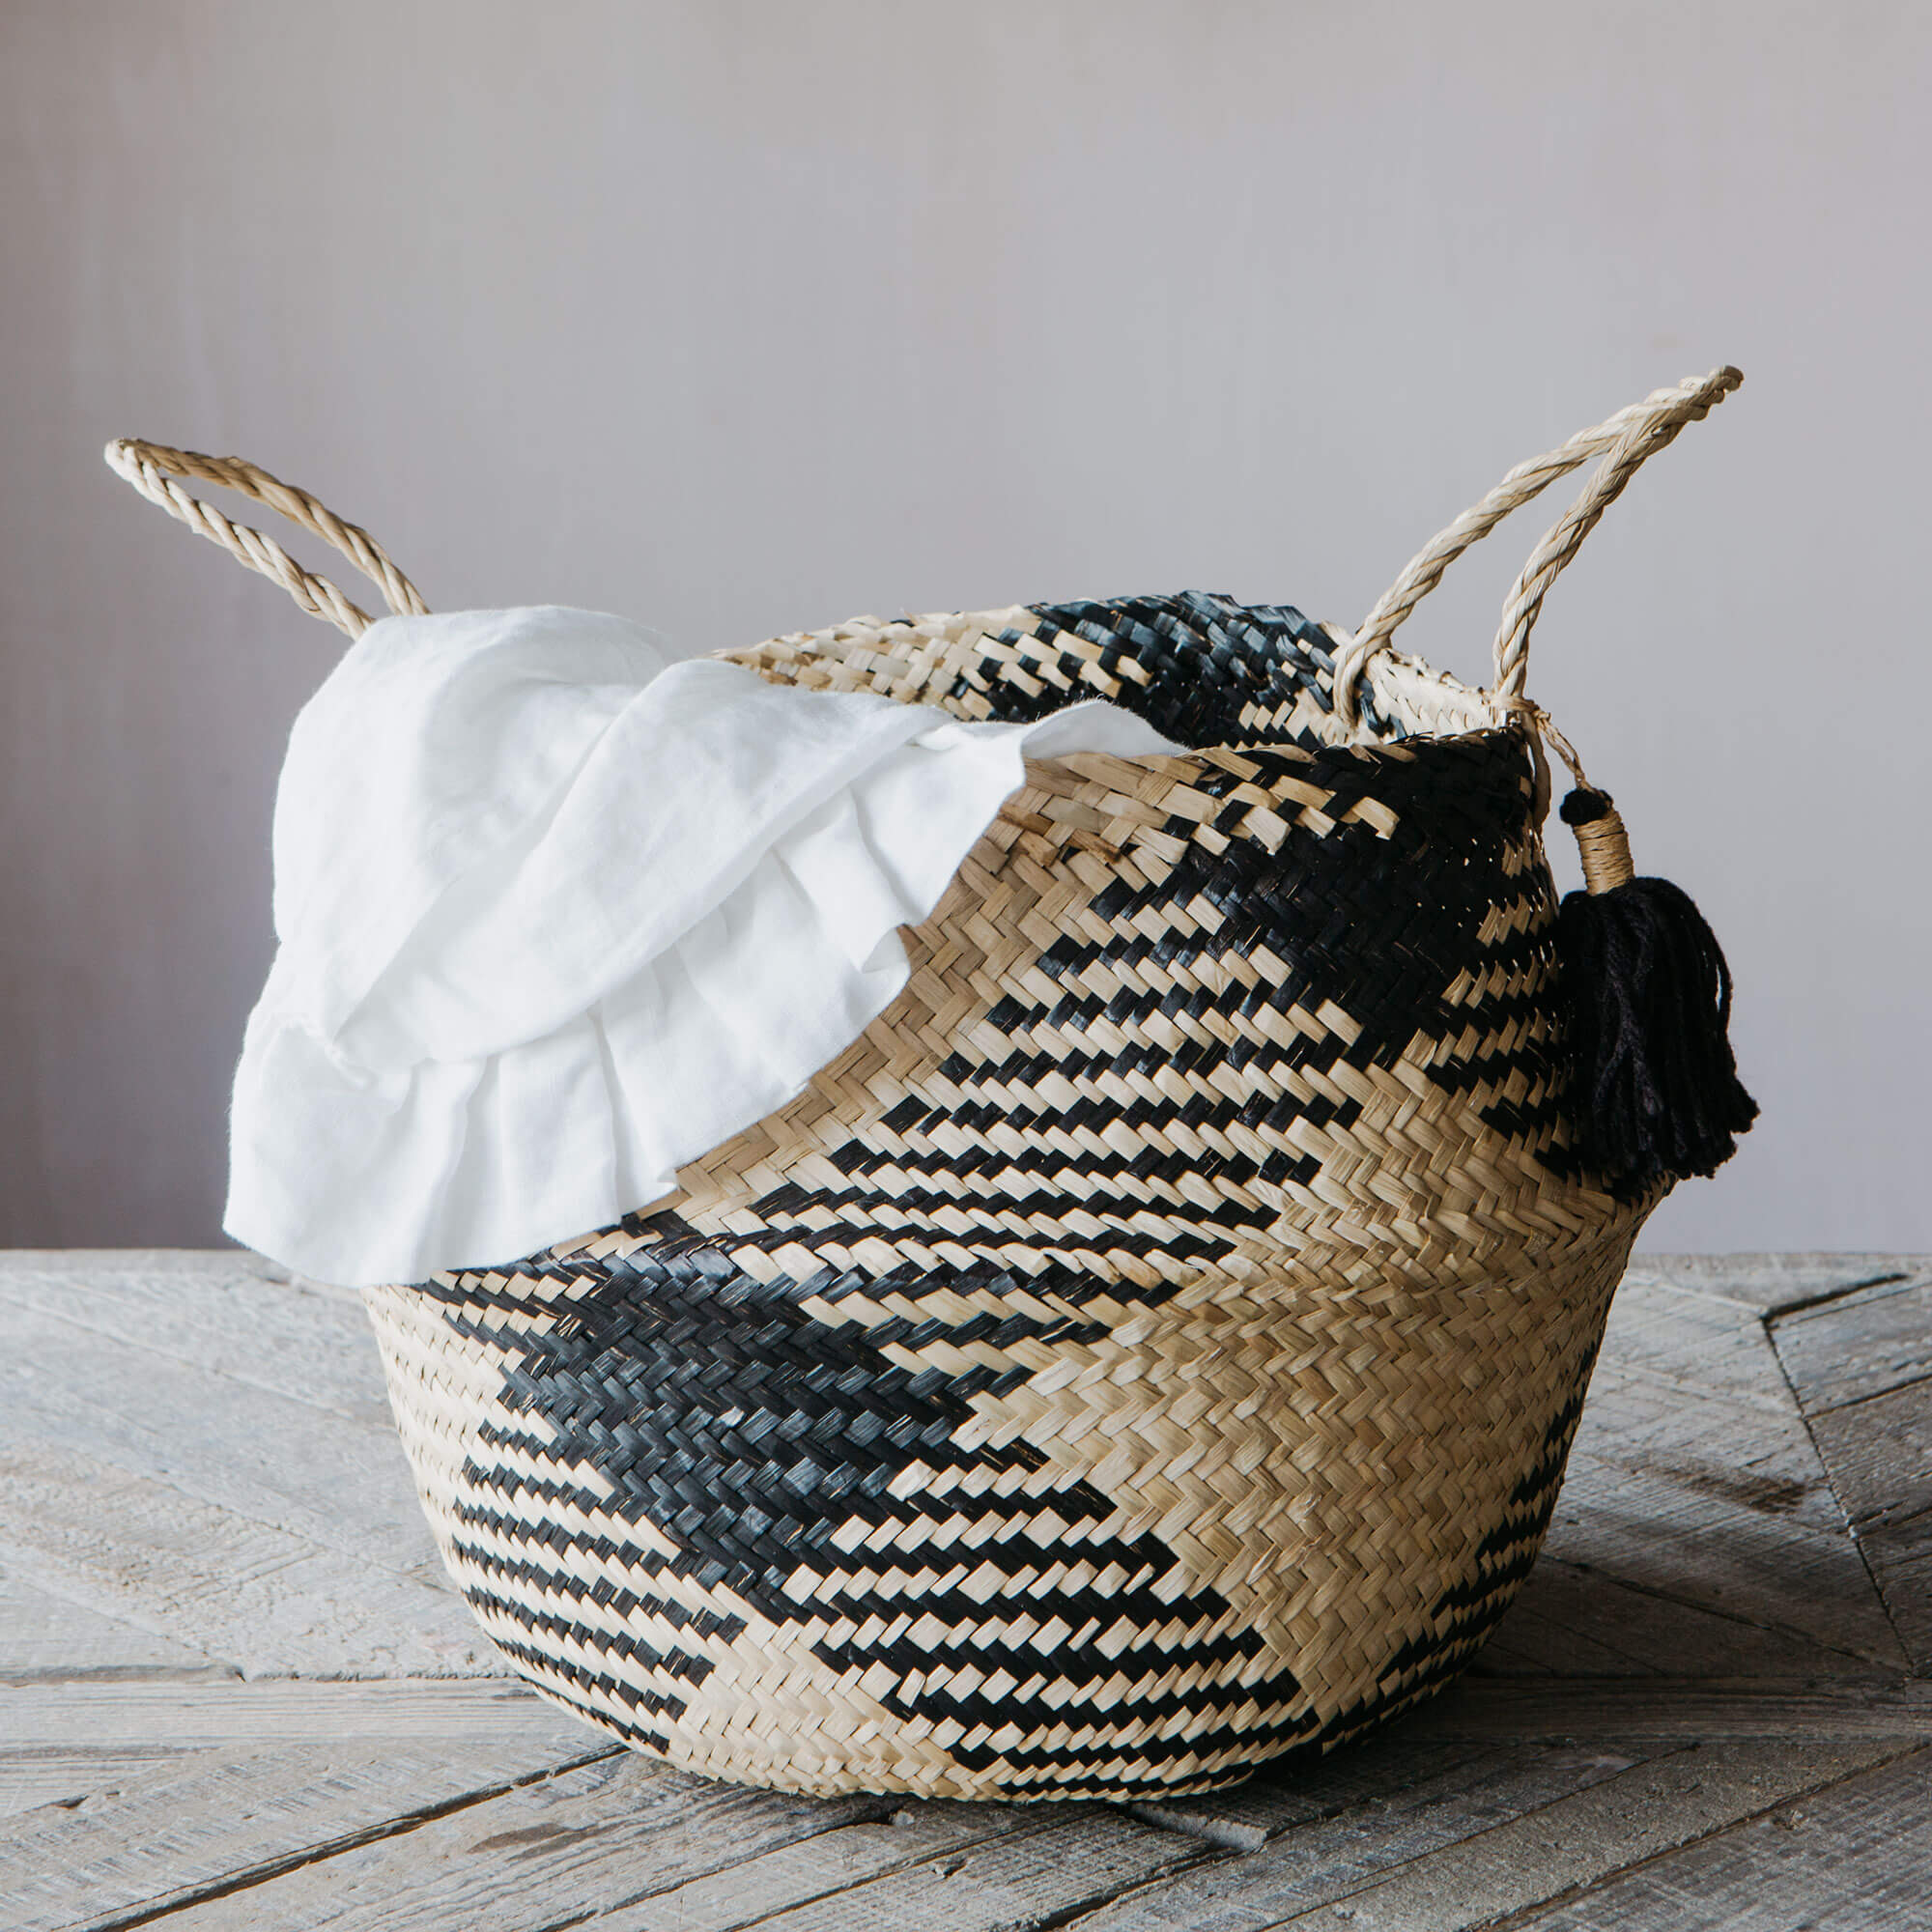 Read more about Graham and green black check tassel basket